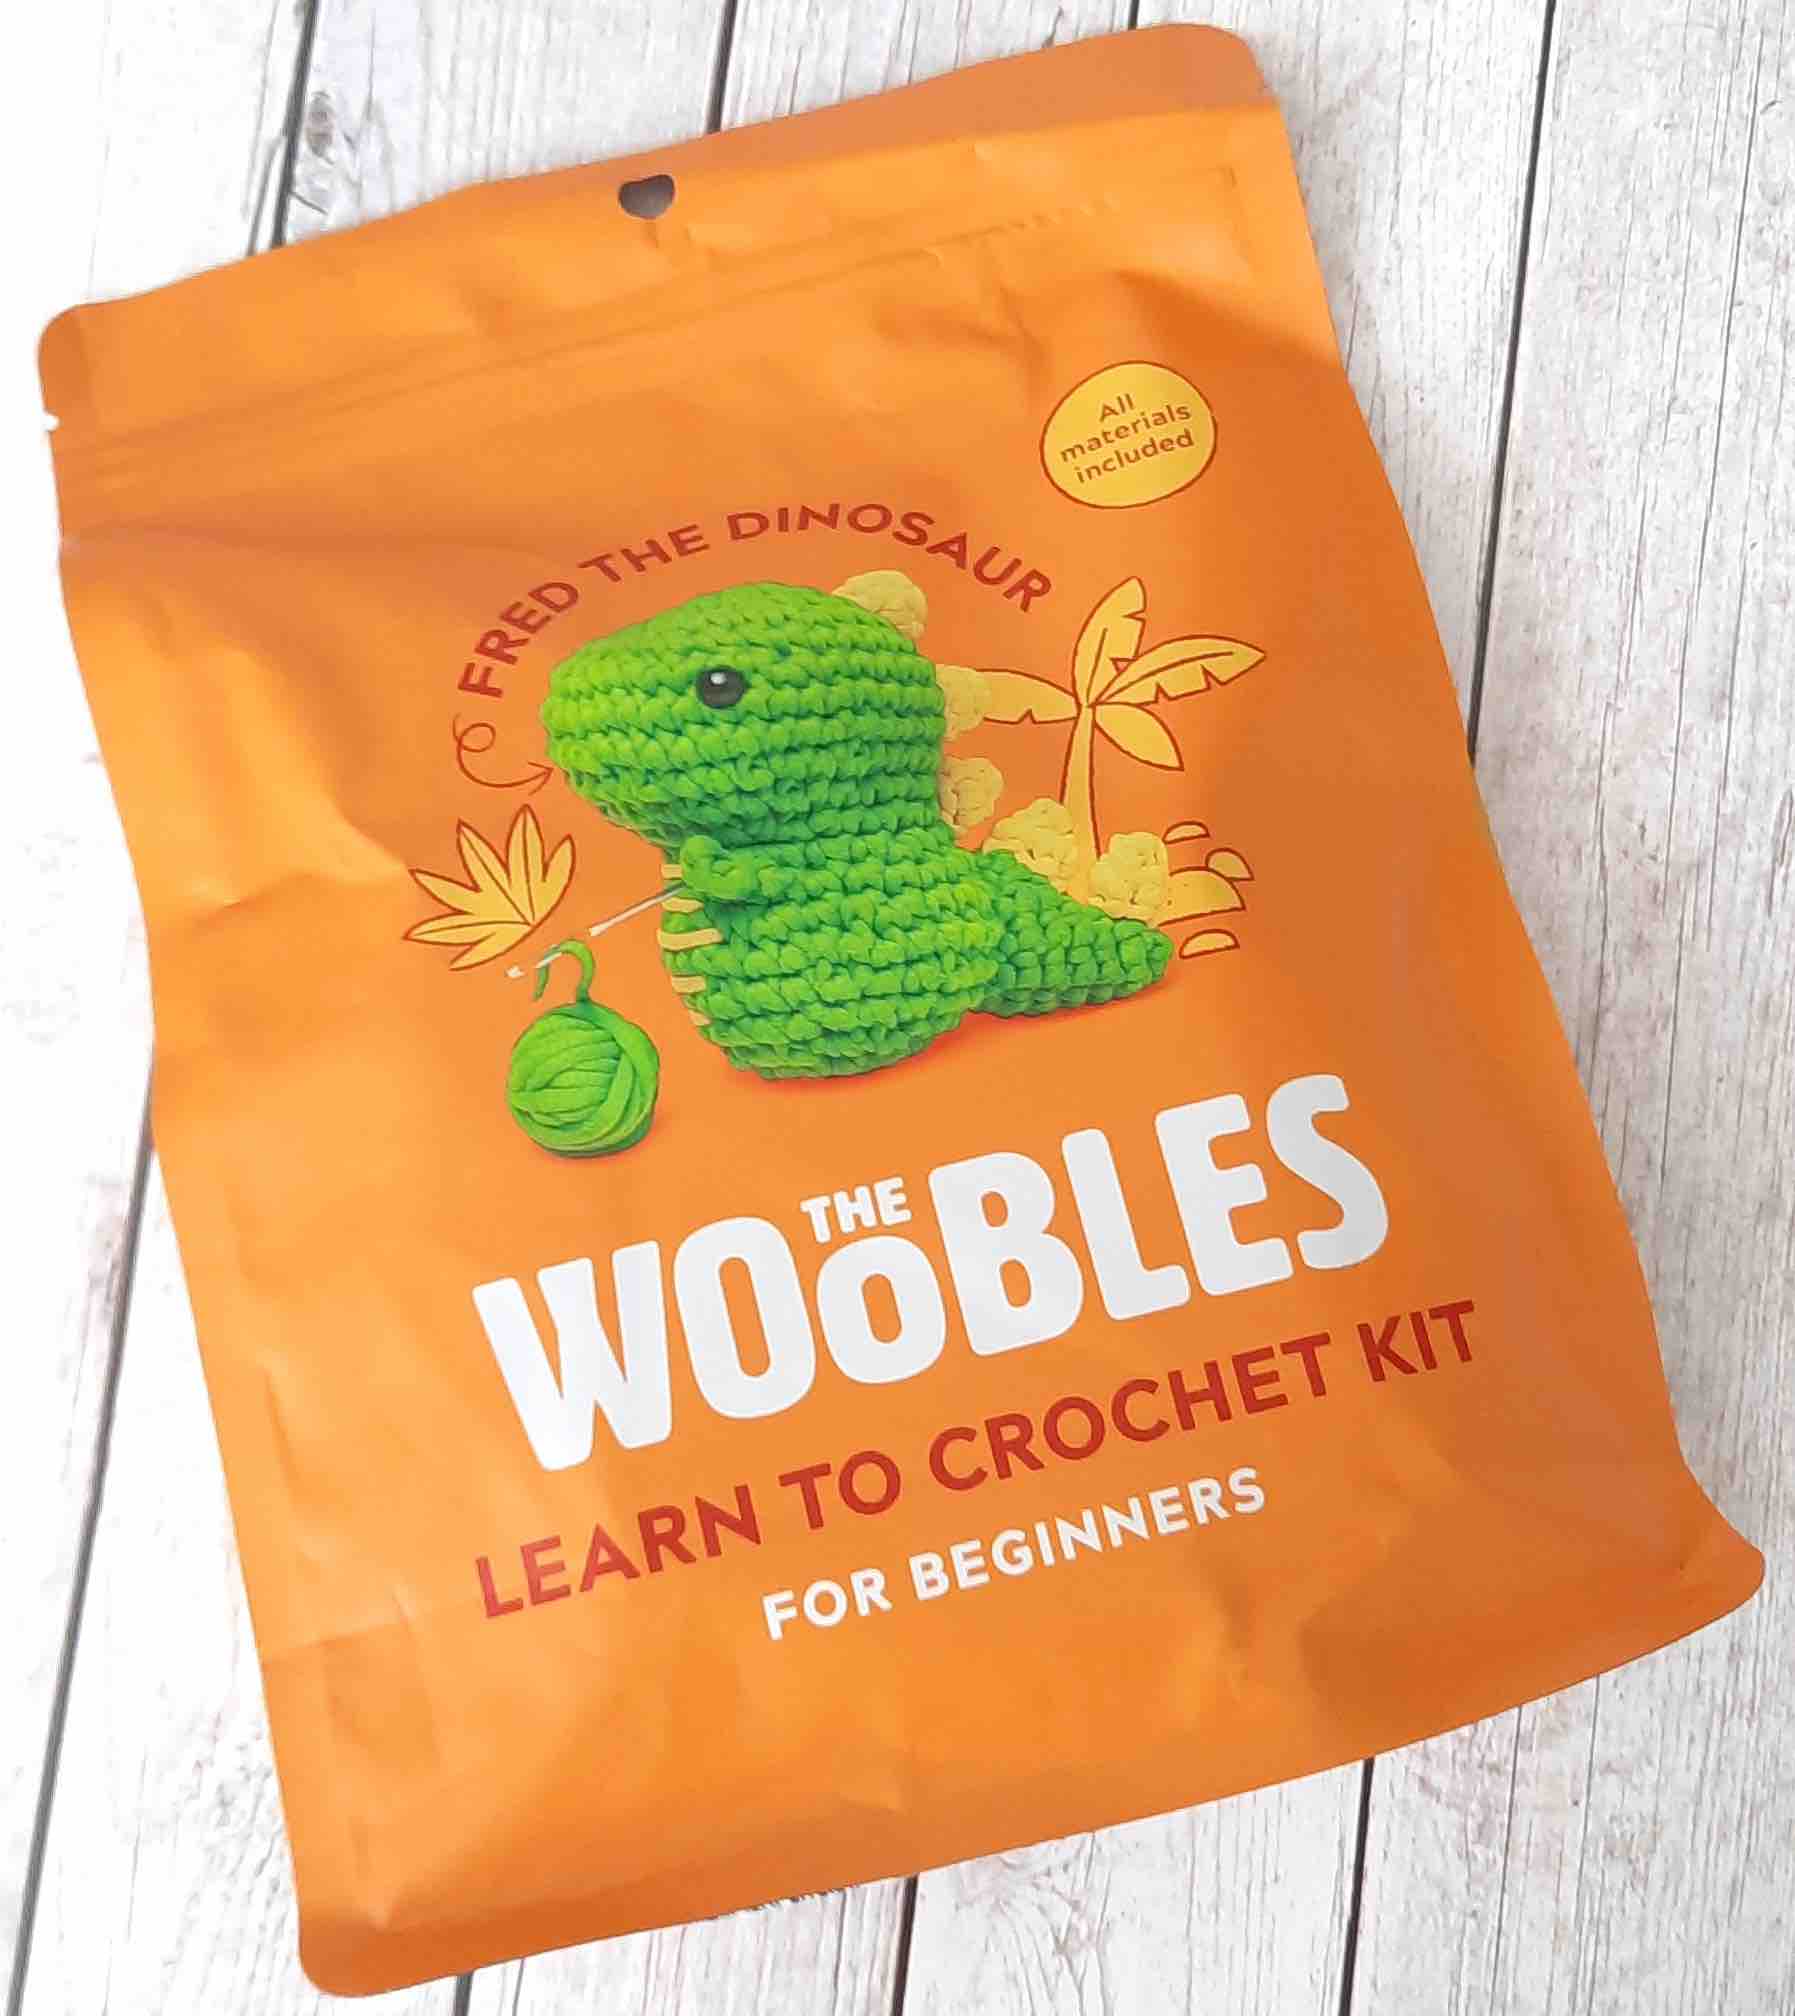 The Woobles crochet kit packaging